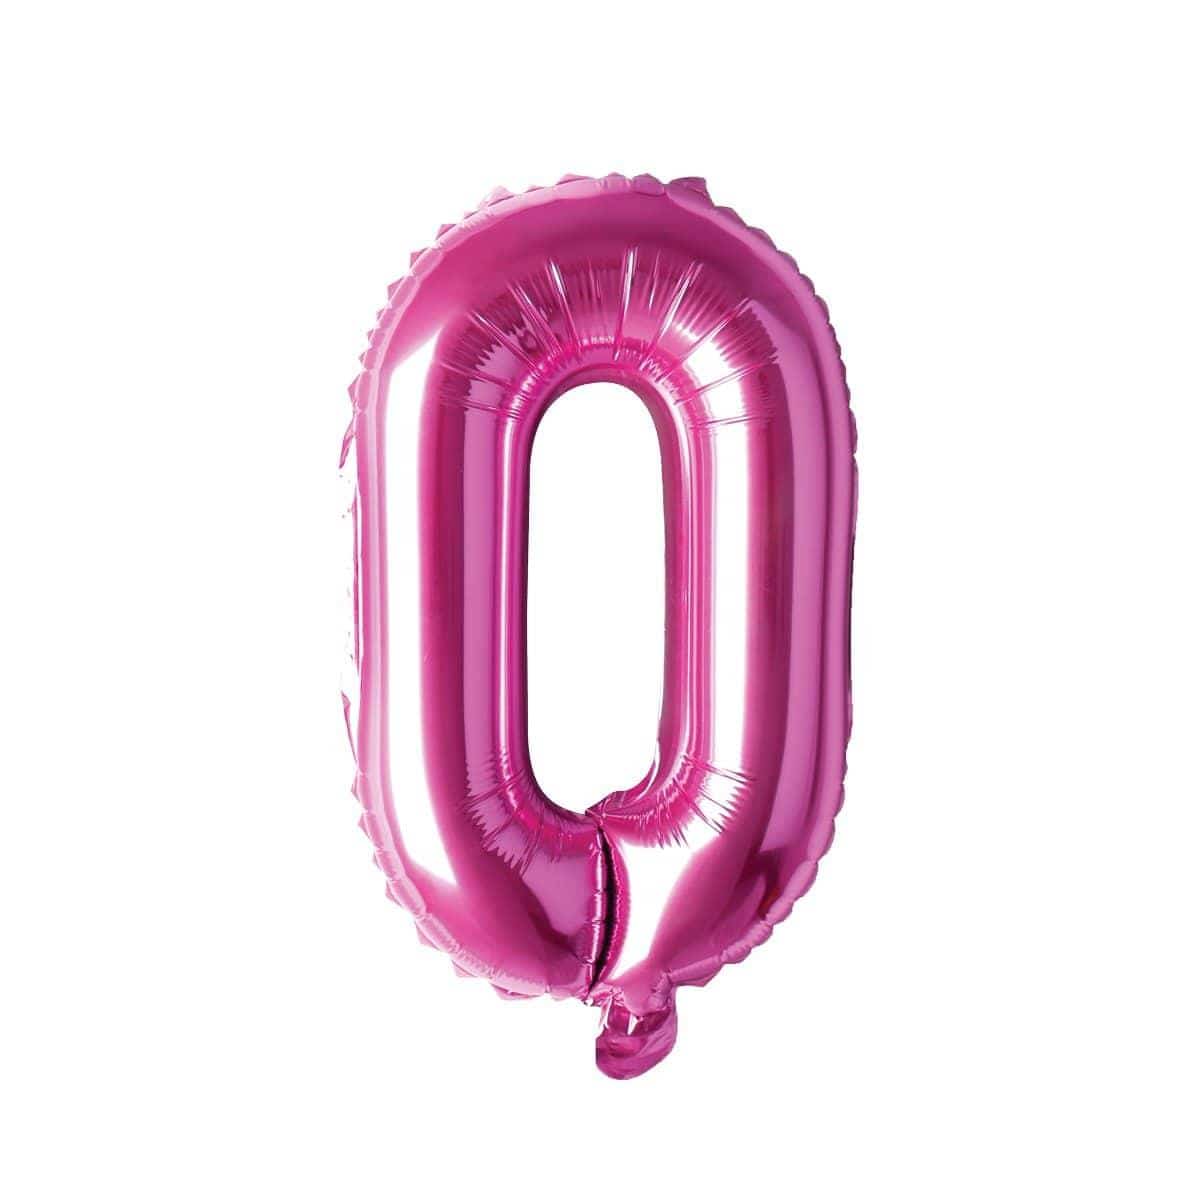 Buy Balloons Pink Number 0 Foil Balloon, 16 Inches sold at Party Expert